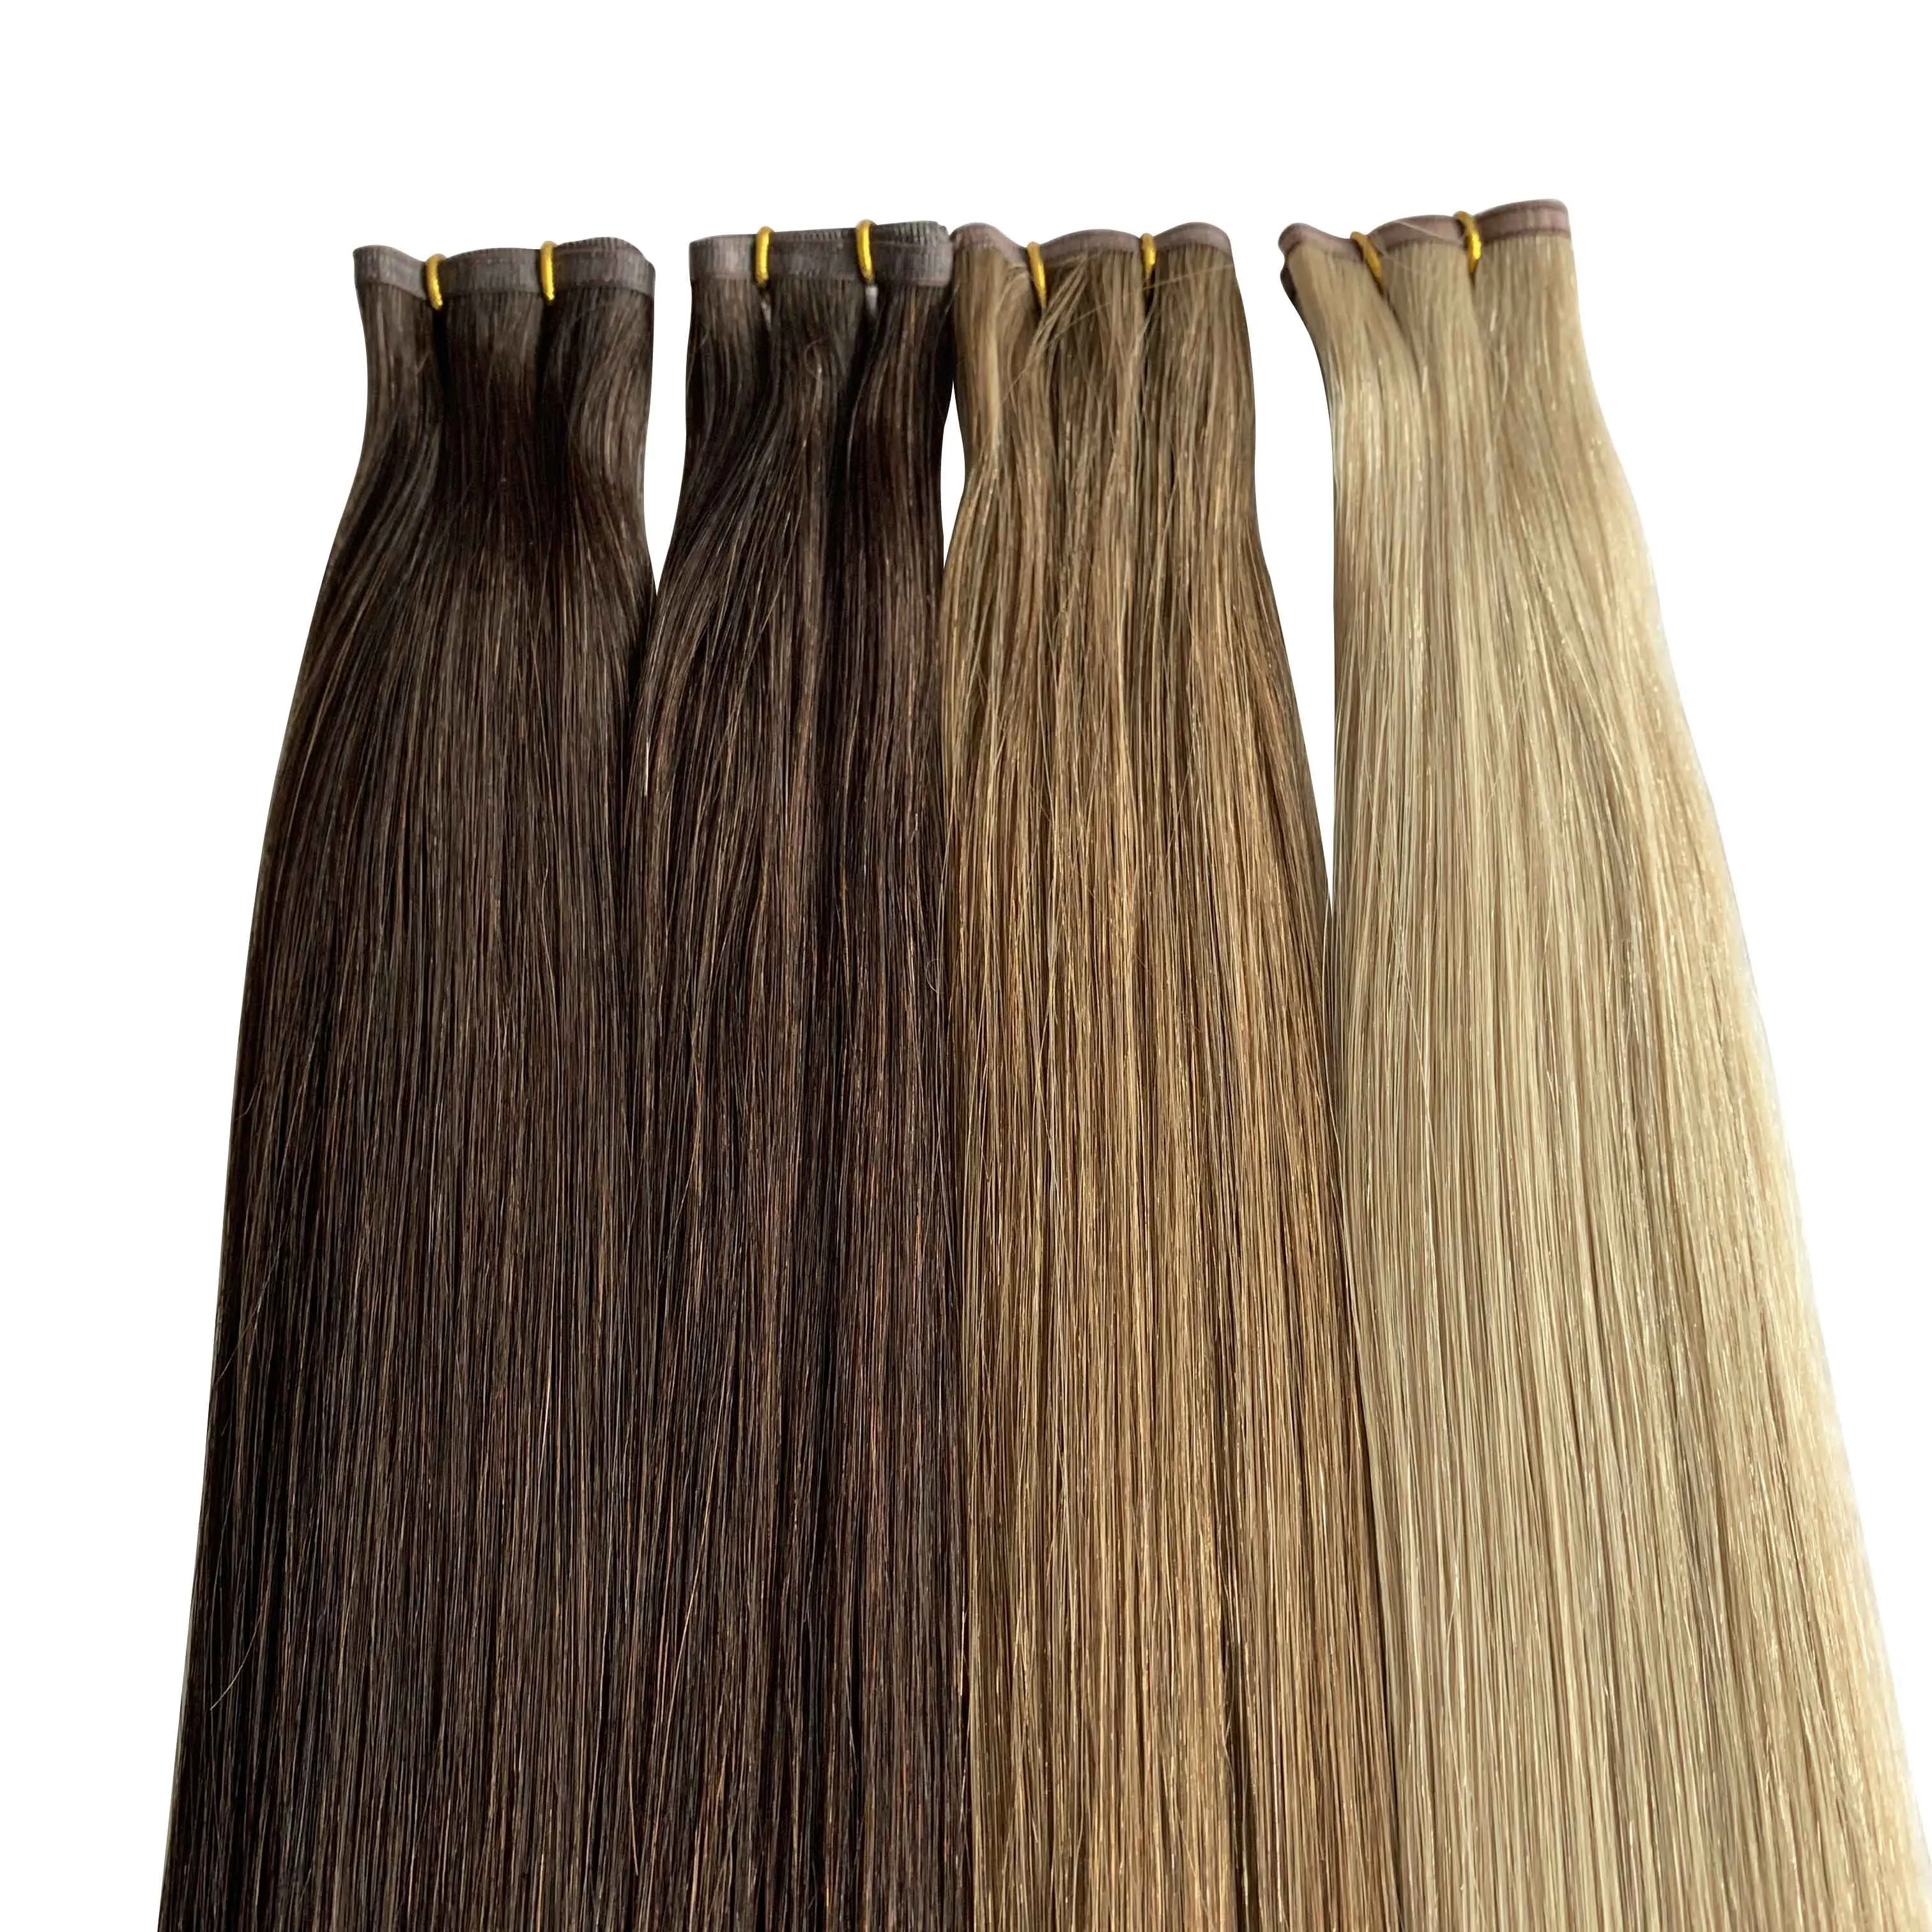 Hot selling 100%human hair extensions  Best russian hair double drawn flat weft  virgin Cuticle Aligned Hair flat weft